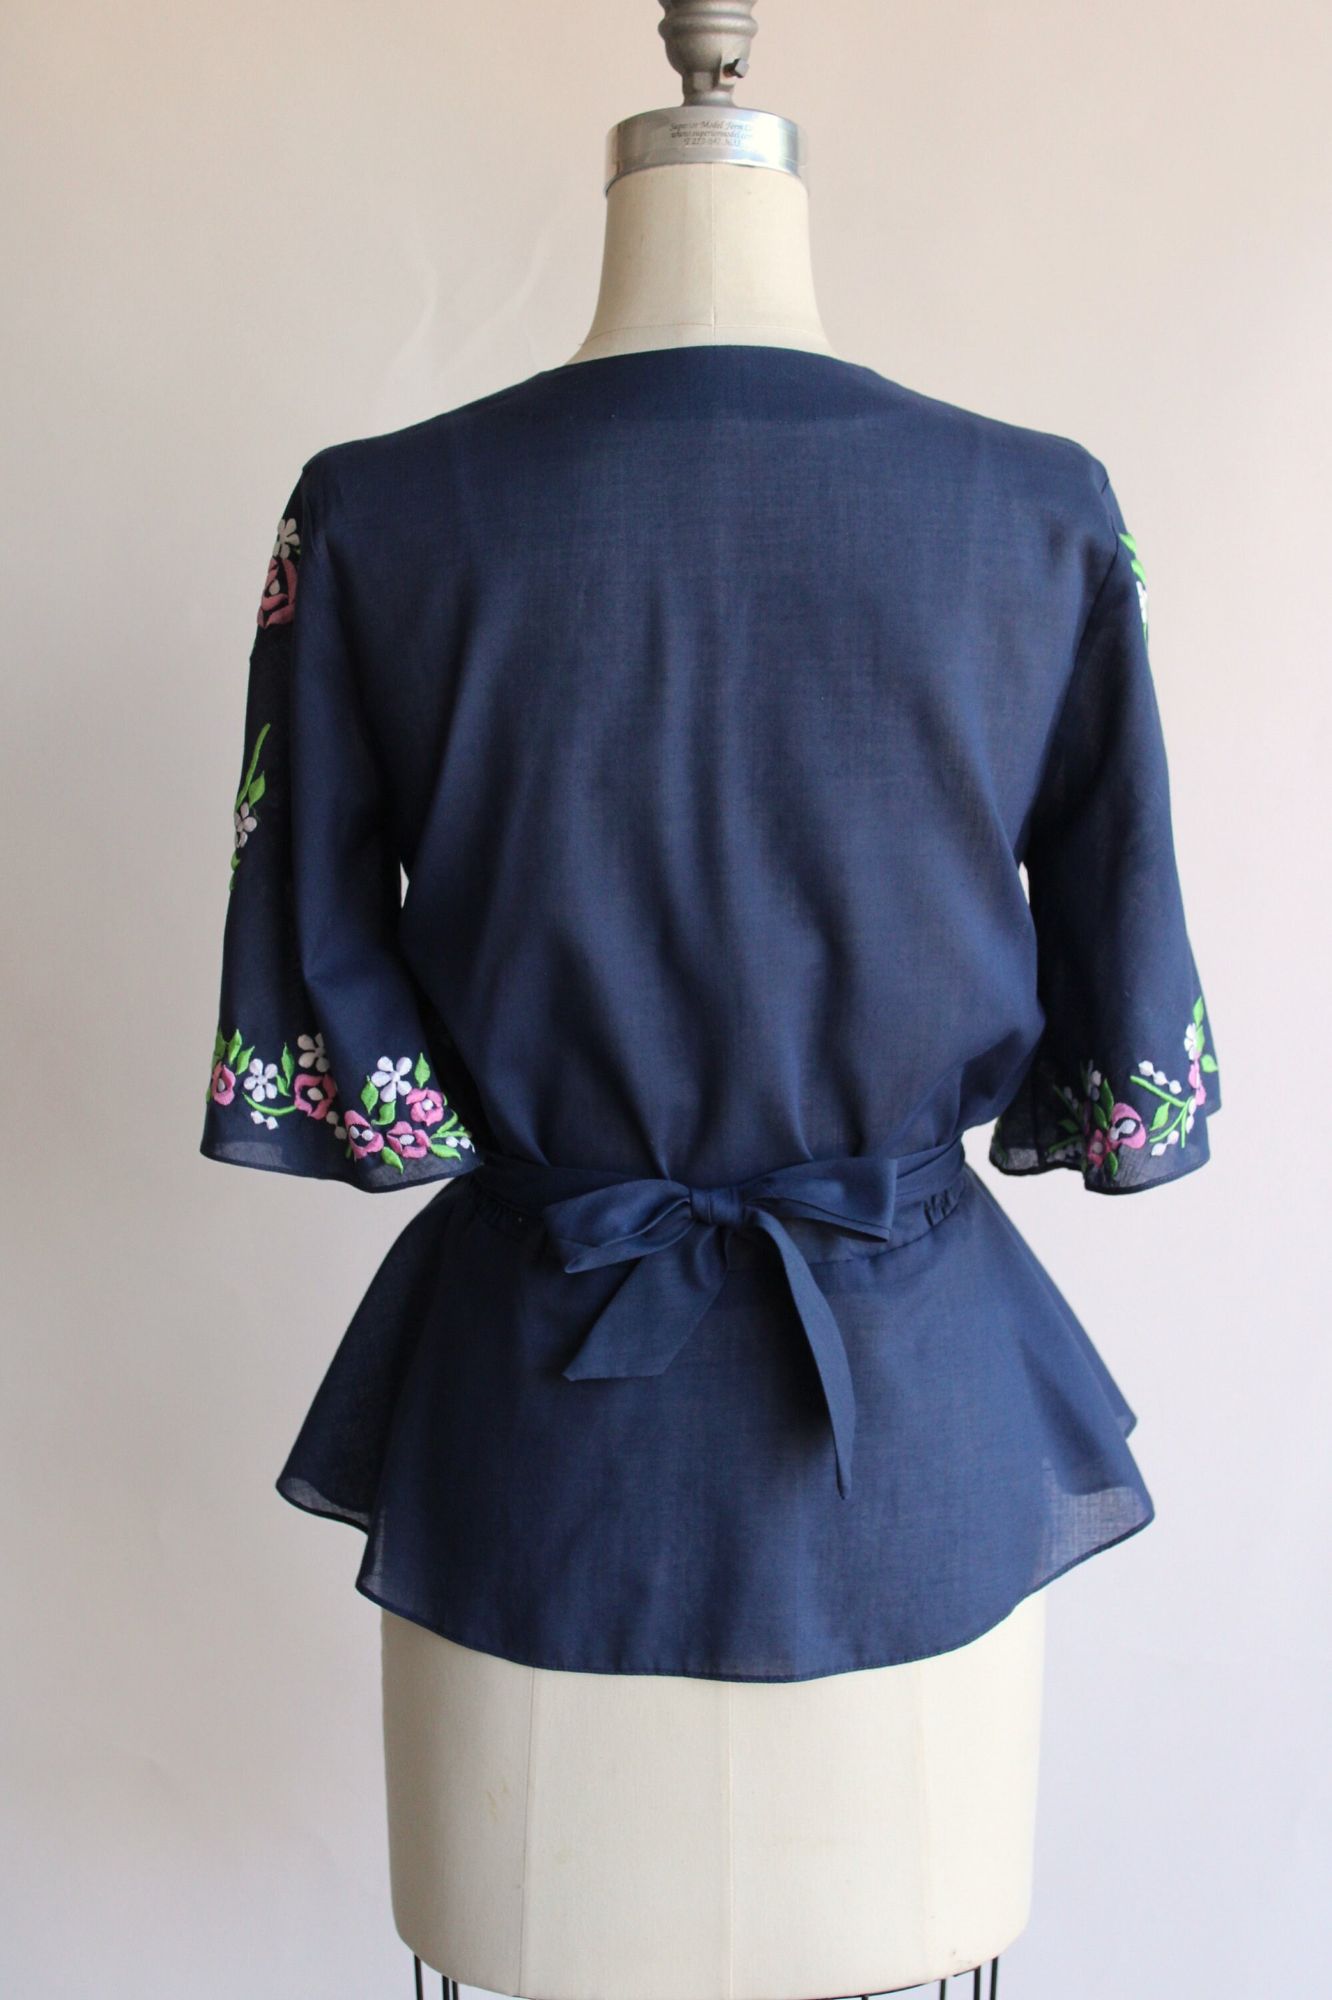 Vintage 1970s 1980s Navy Blue Embroidered Peplum Top